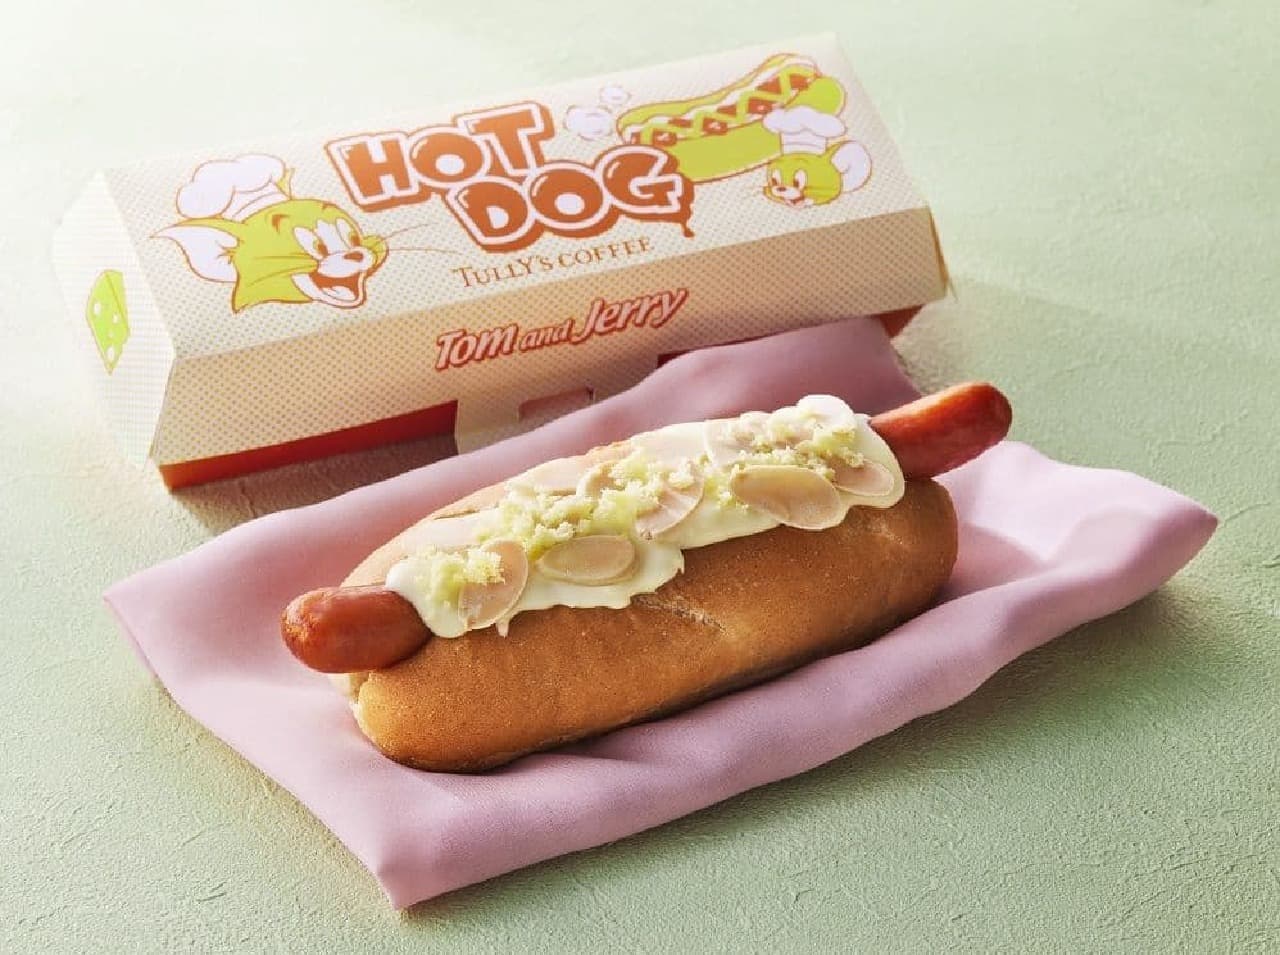 Tully's Coffee "Tom & Jerry Hot Dog Triple Cheese & Almond".